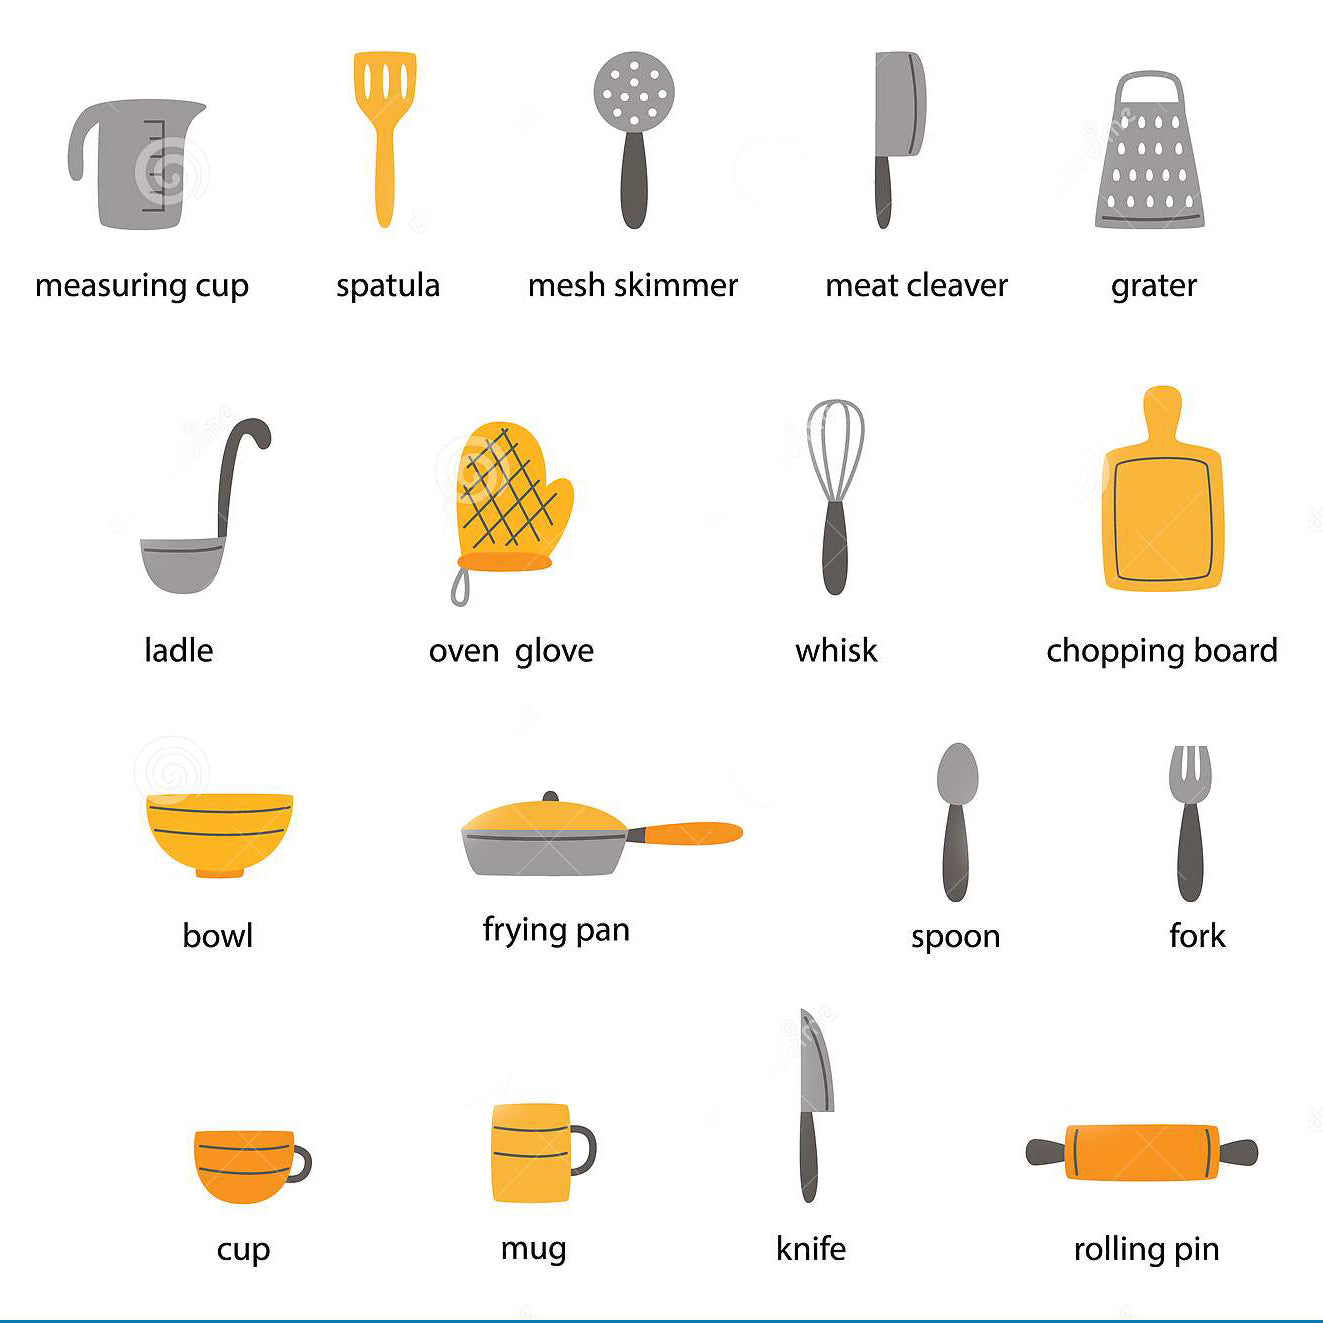 5 Kitchen Tools - Every Chef’s Choice